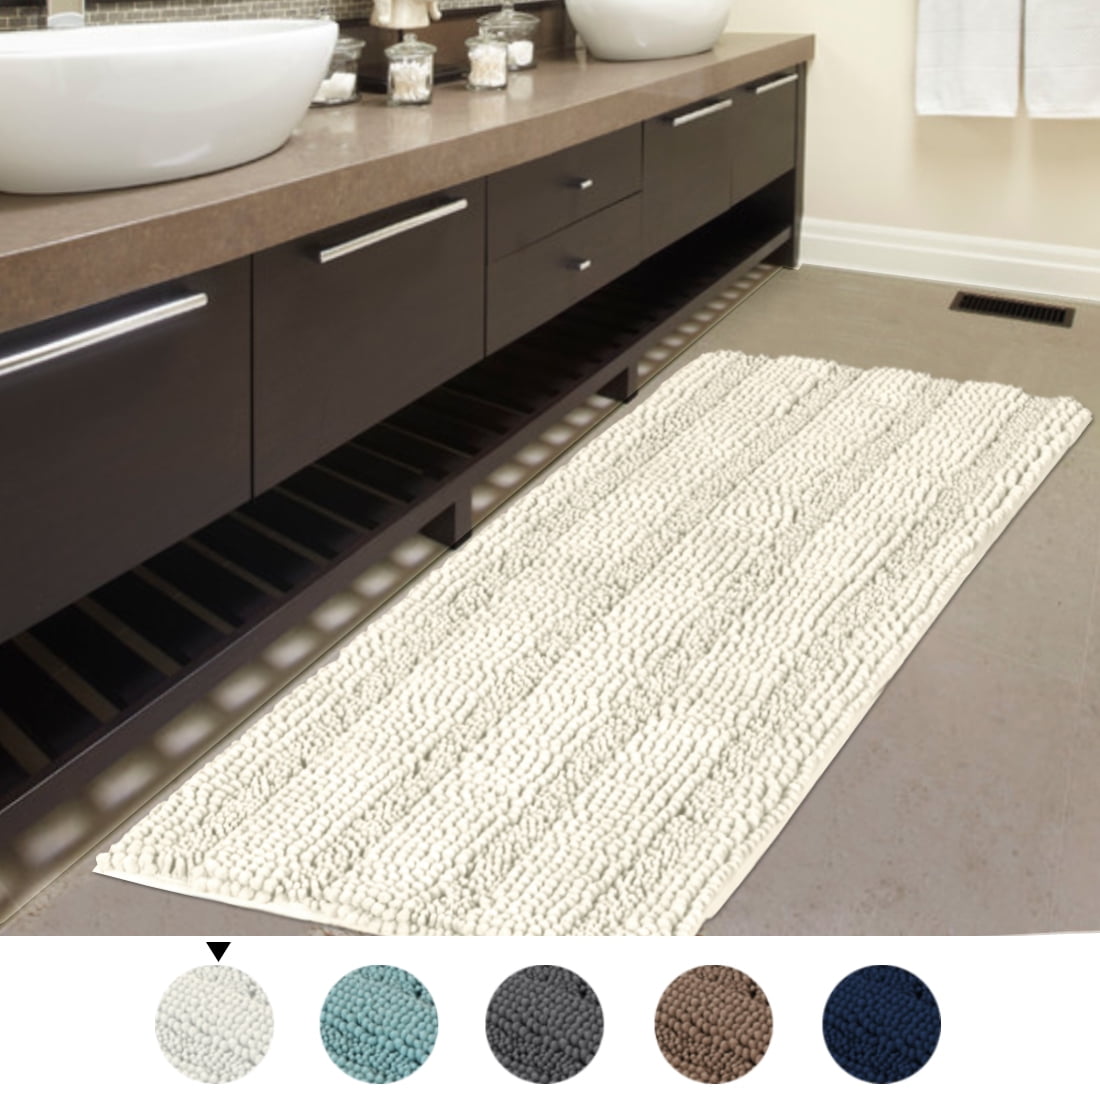 Navy, 47 x 17 Plus 17 x 24 - Inches Bathroom Rugs Bath Mats Sets Super Absorbent Chenille Striped Bath Mats Non Skid Machine Wash Dry Rugs for Bathroom Floor Set of 2